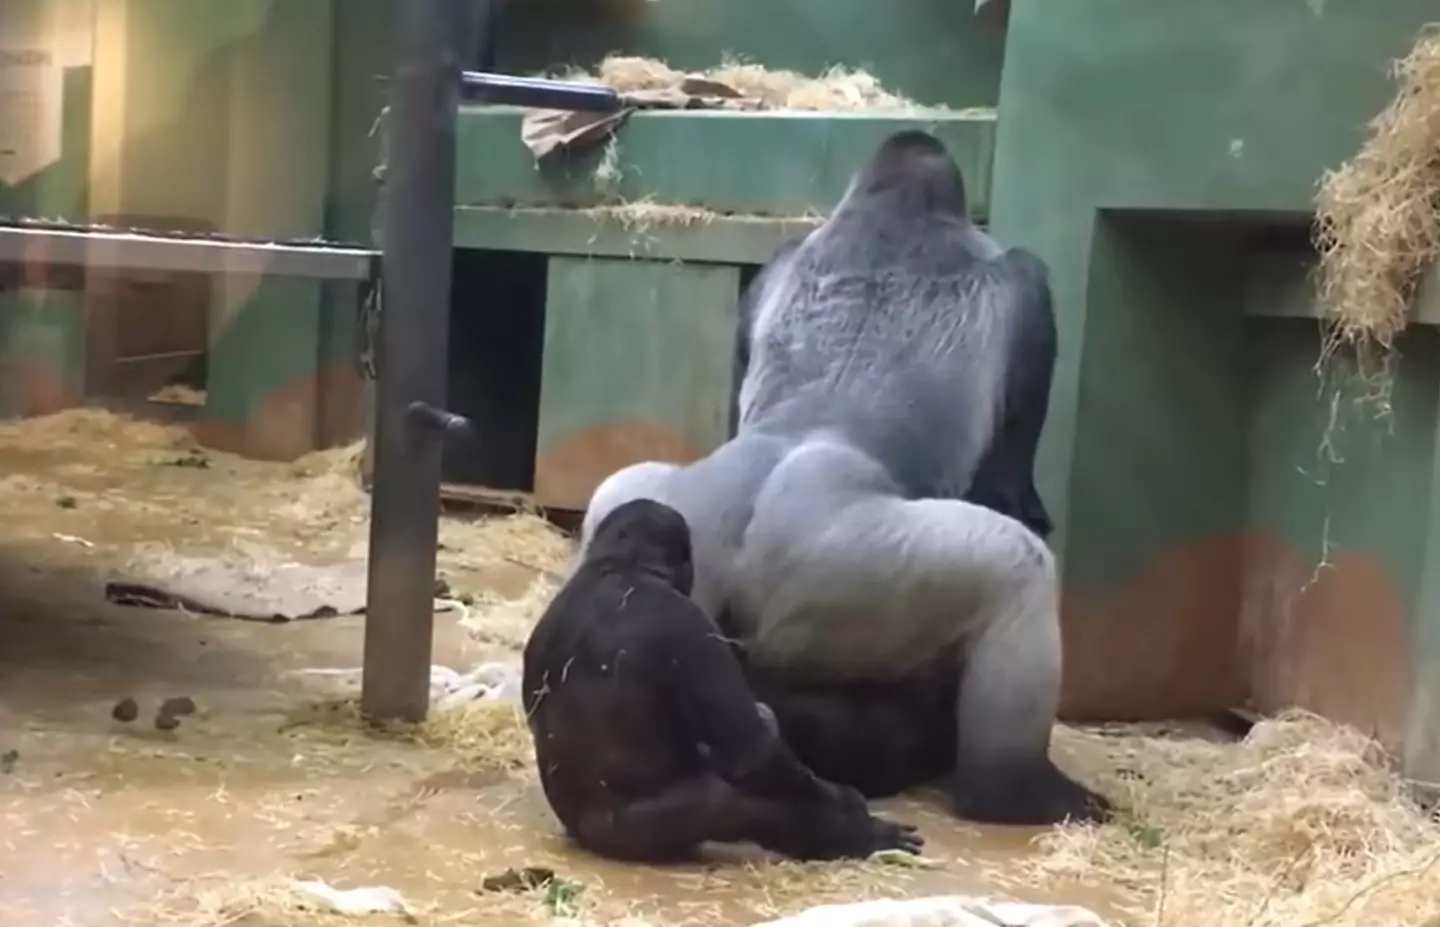 Two gorillas started mating at the zoo, and a third got very close to watch.